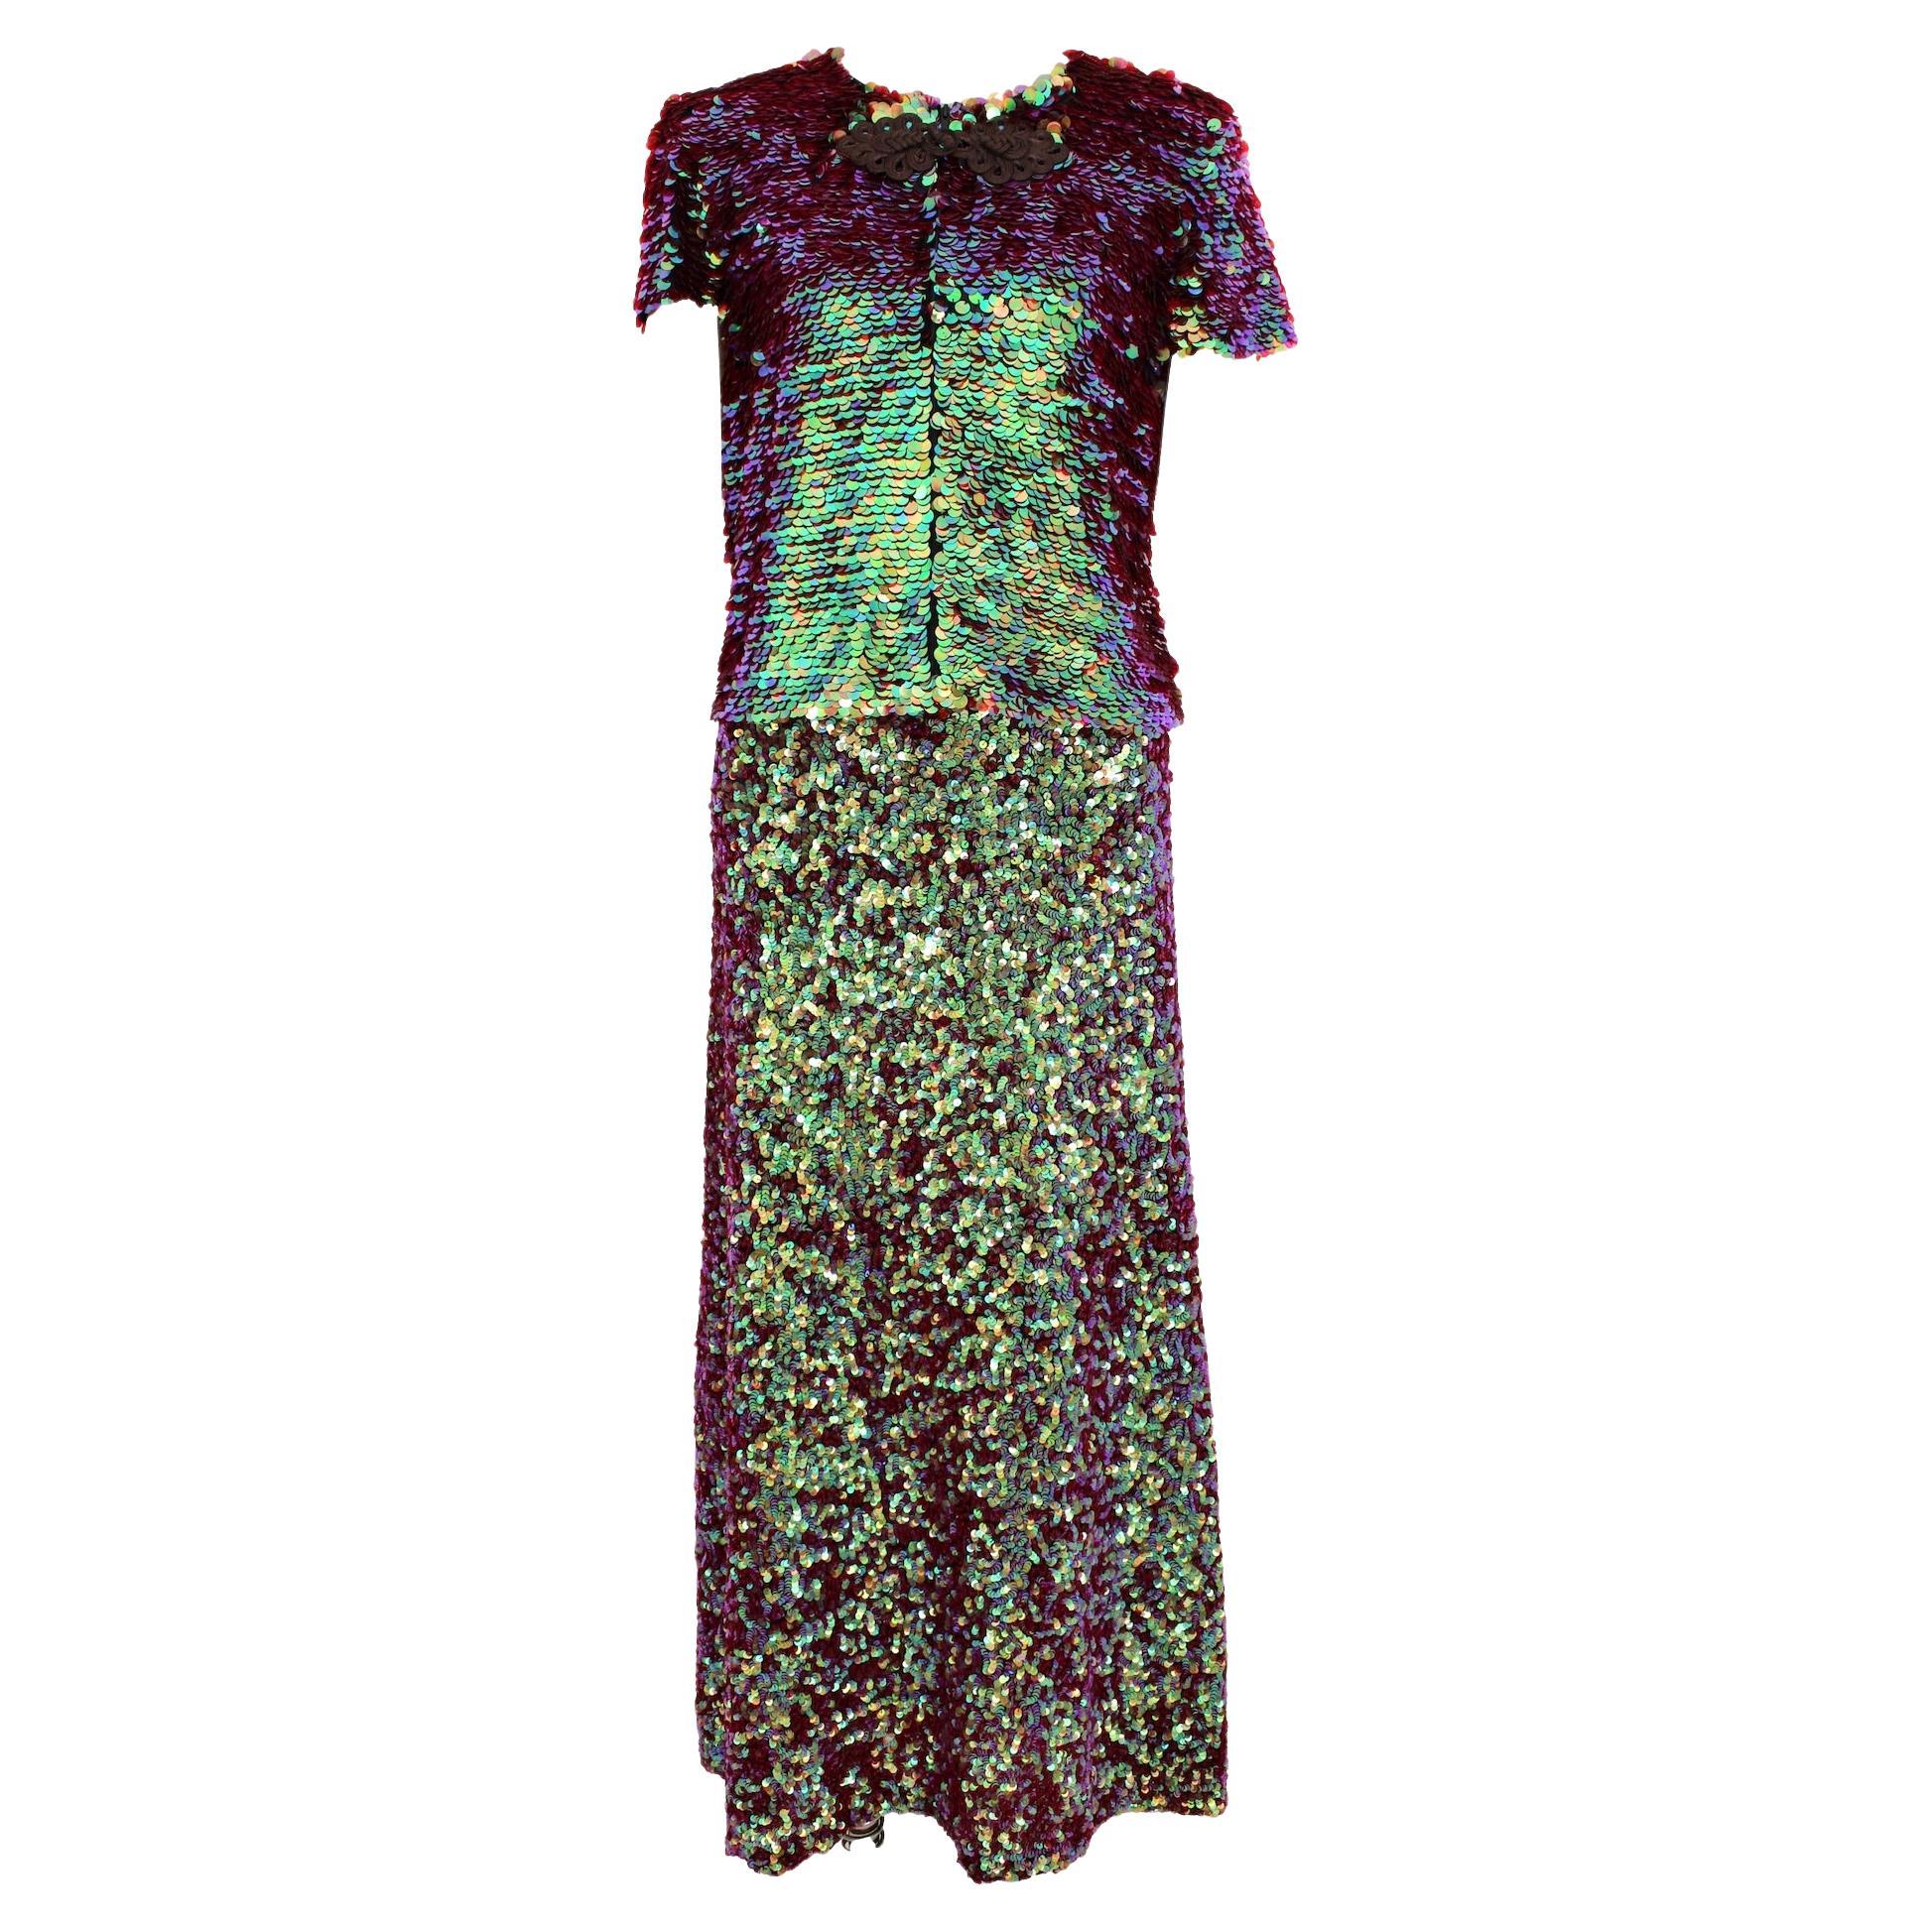 This is a vintage 90s Jean Paul Gaultier skirt suit that is perfect for evening wear. The suit features a long skirt with iridescent sequins in a variety of colors that create a beautiful, eye-catching effect. The short bolero jacket also features